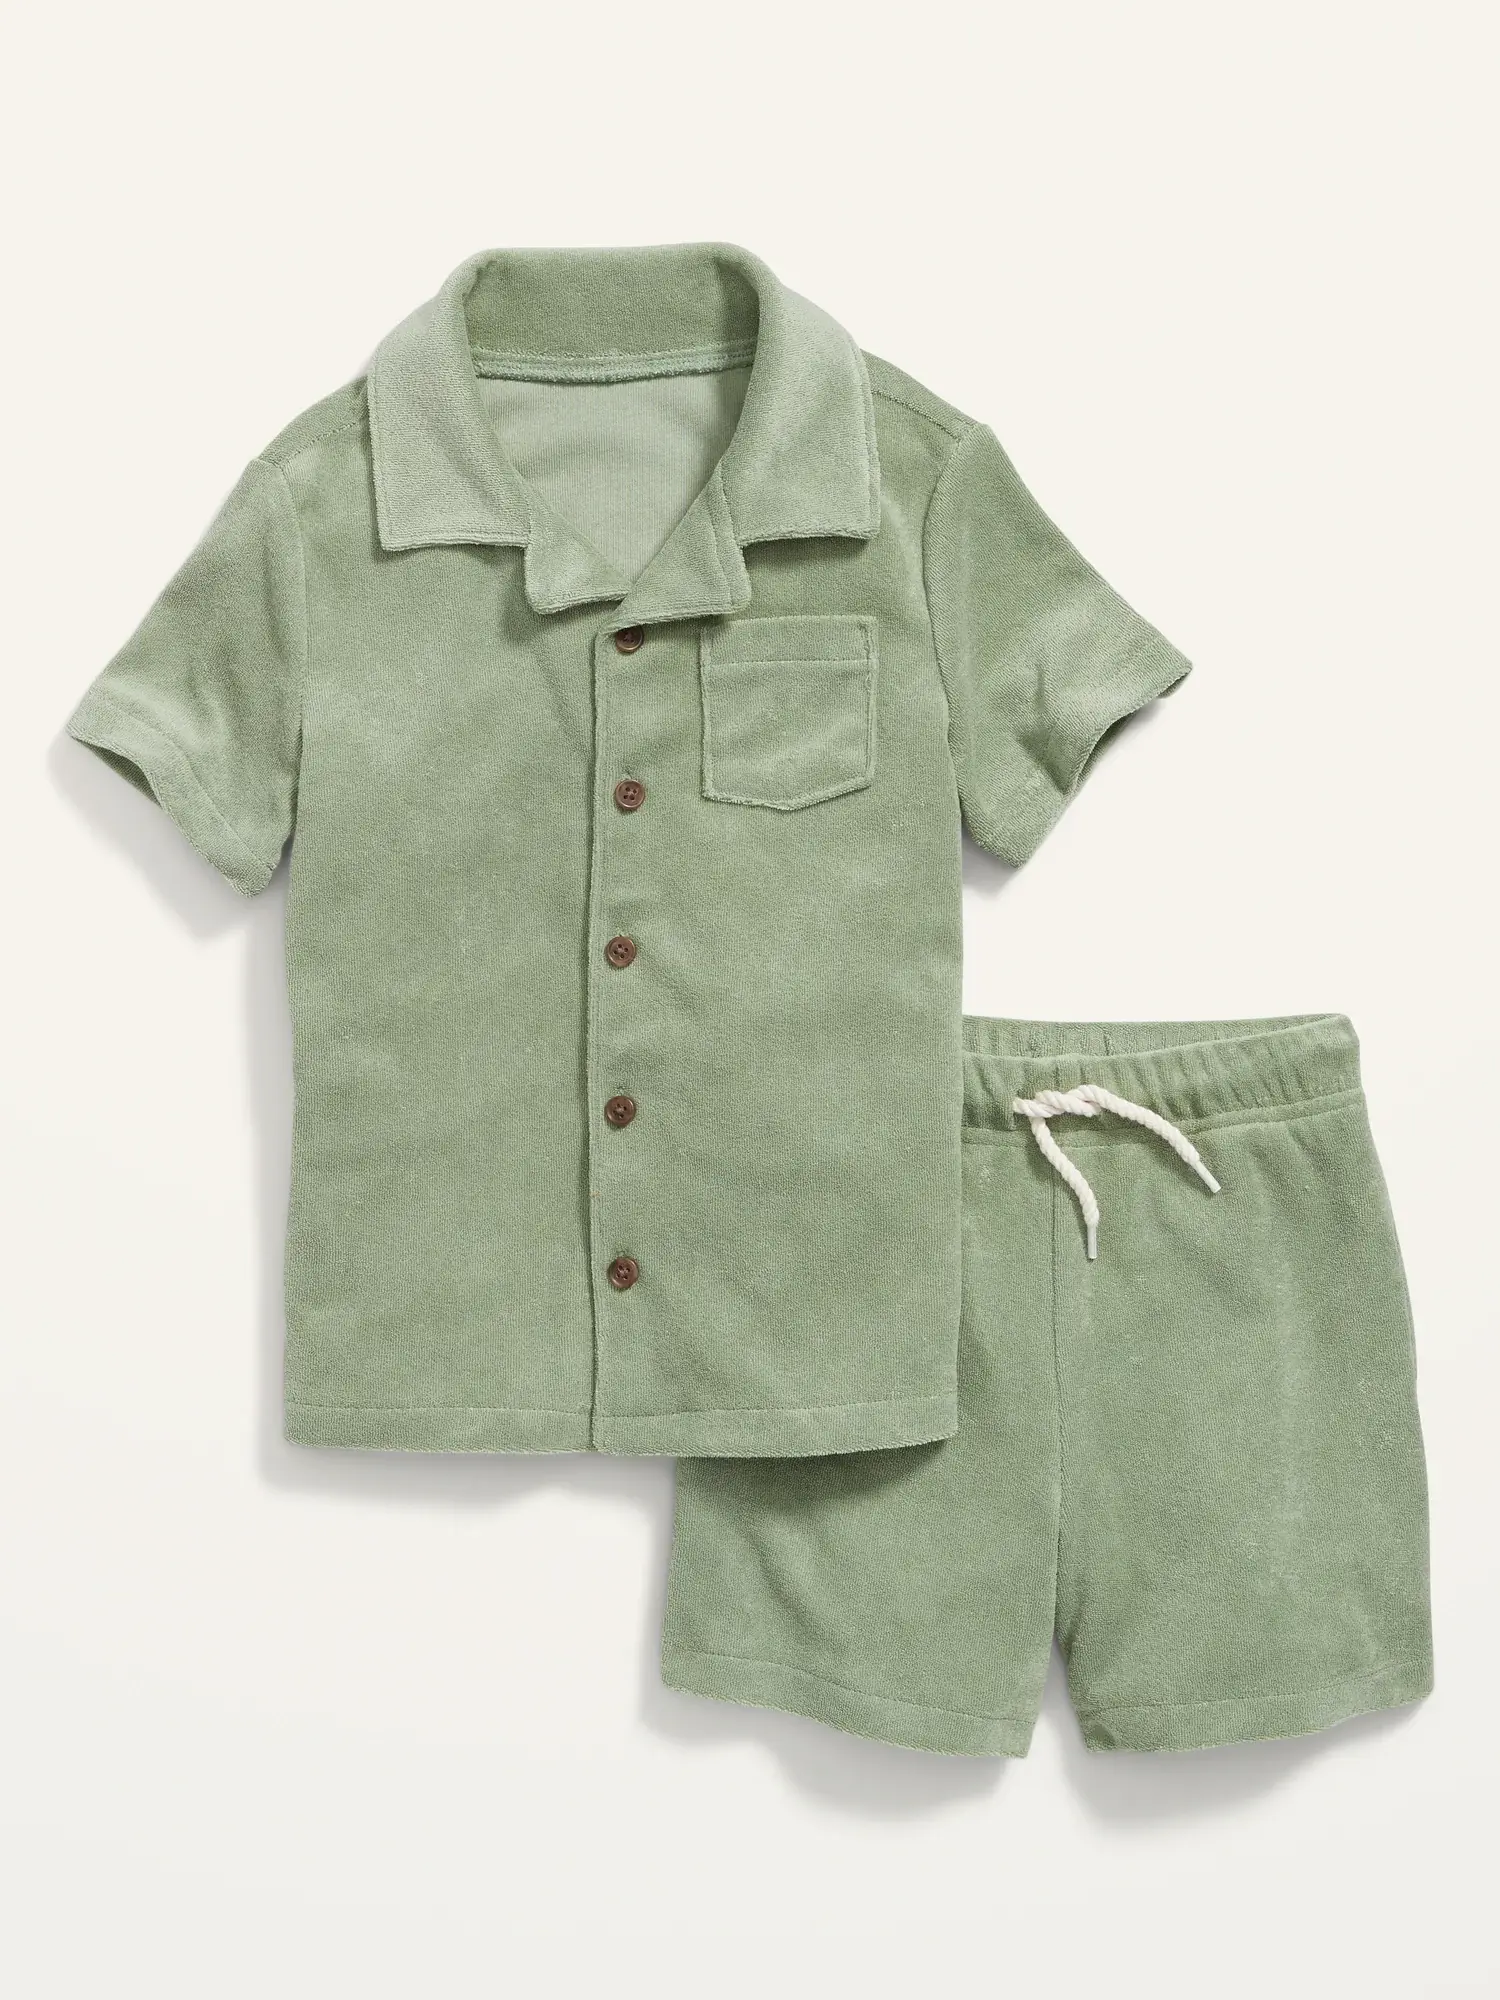 Old Navy Short-Sleeve Loop-Terry Shirt and Shorts Set for Toddler Boys green. 1